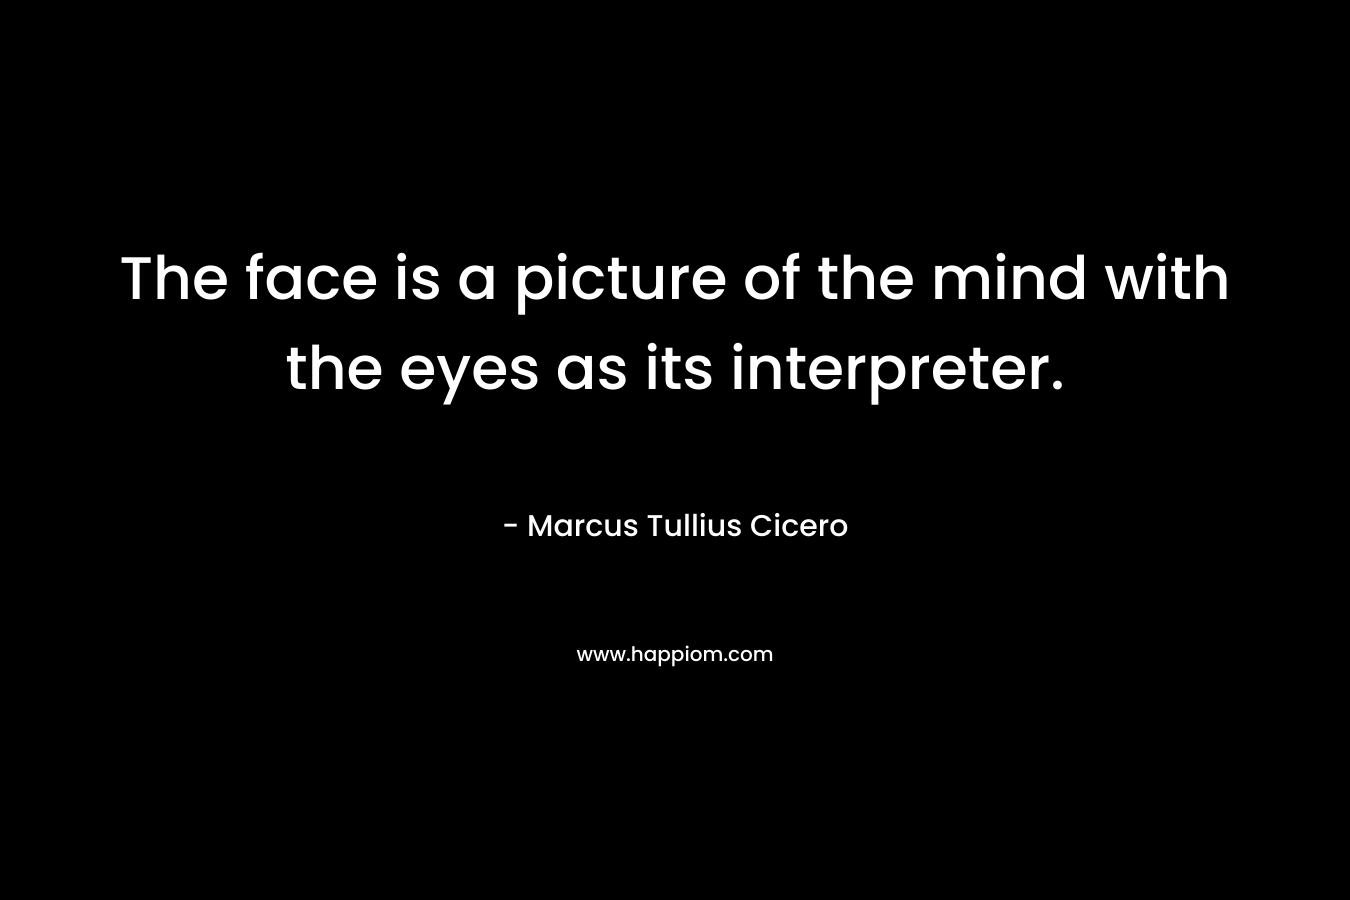 The face is a picture of the mind with the eyes as its interpreter. – Marcus Tullius Cicero